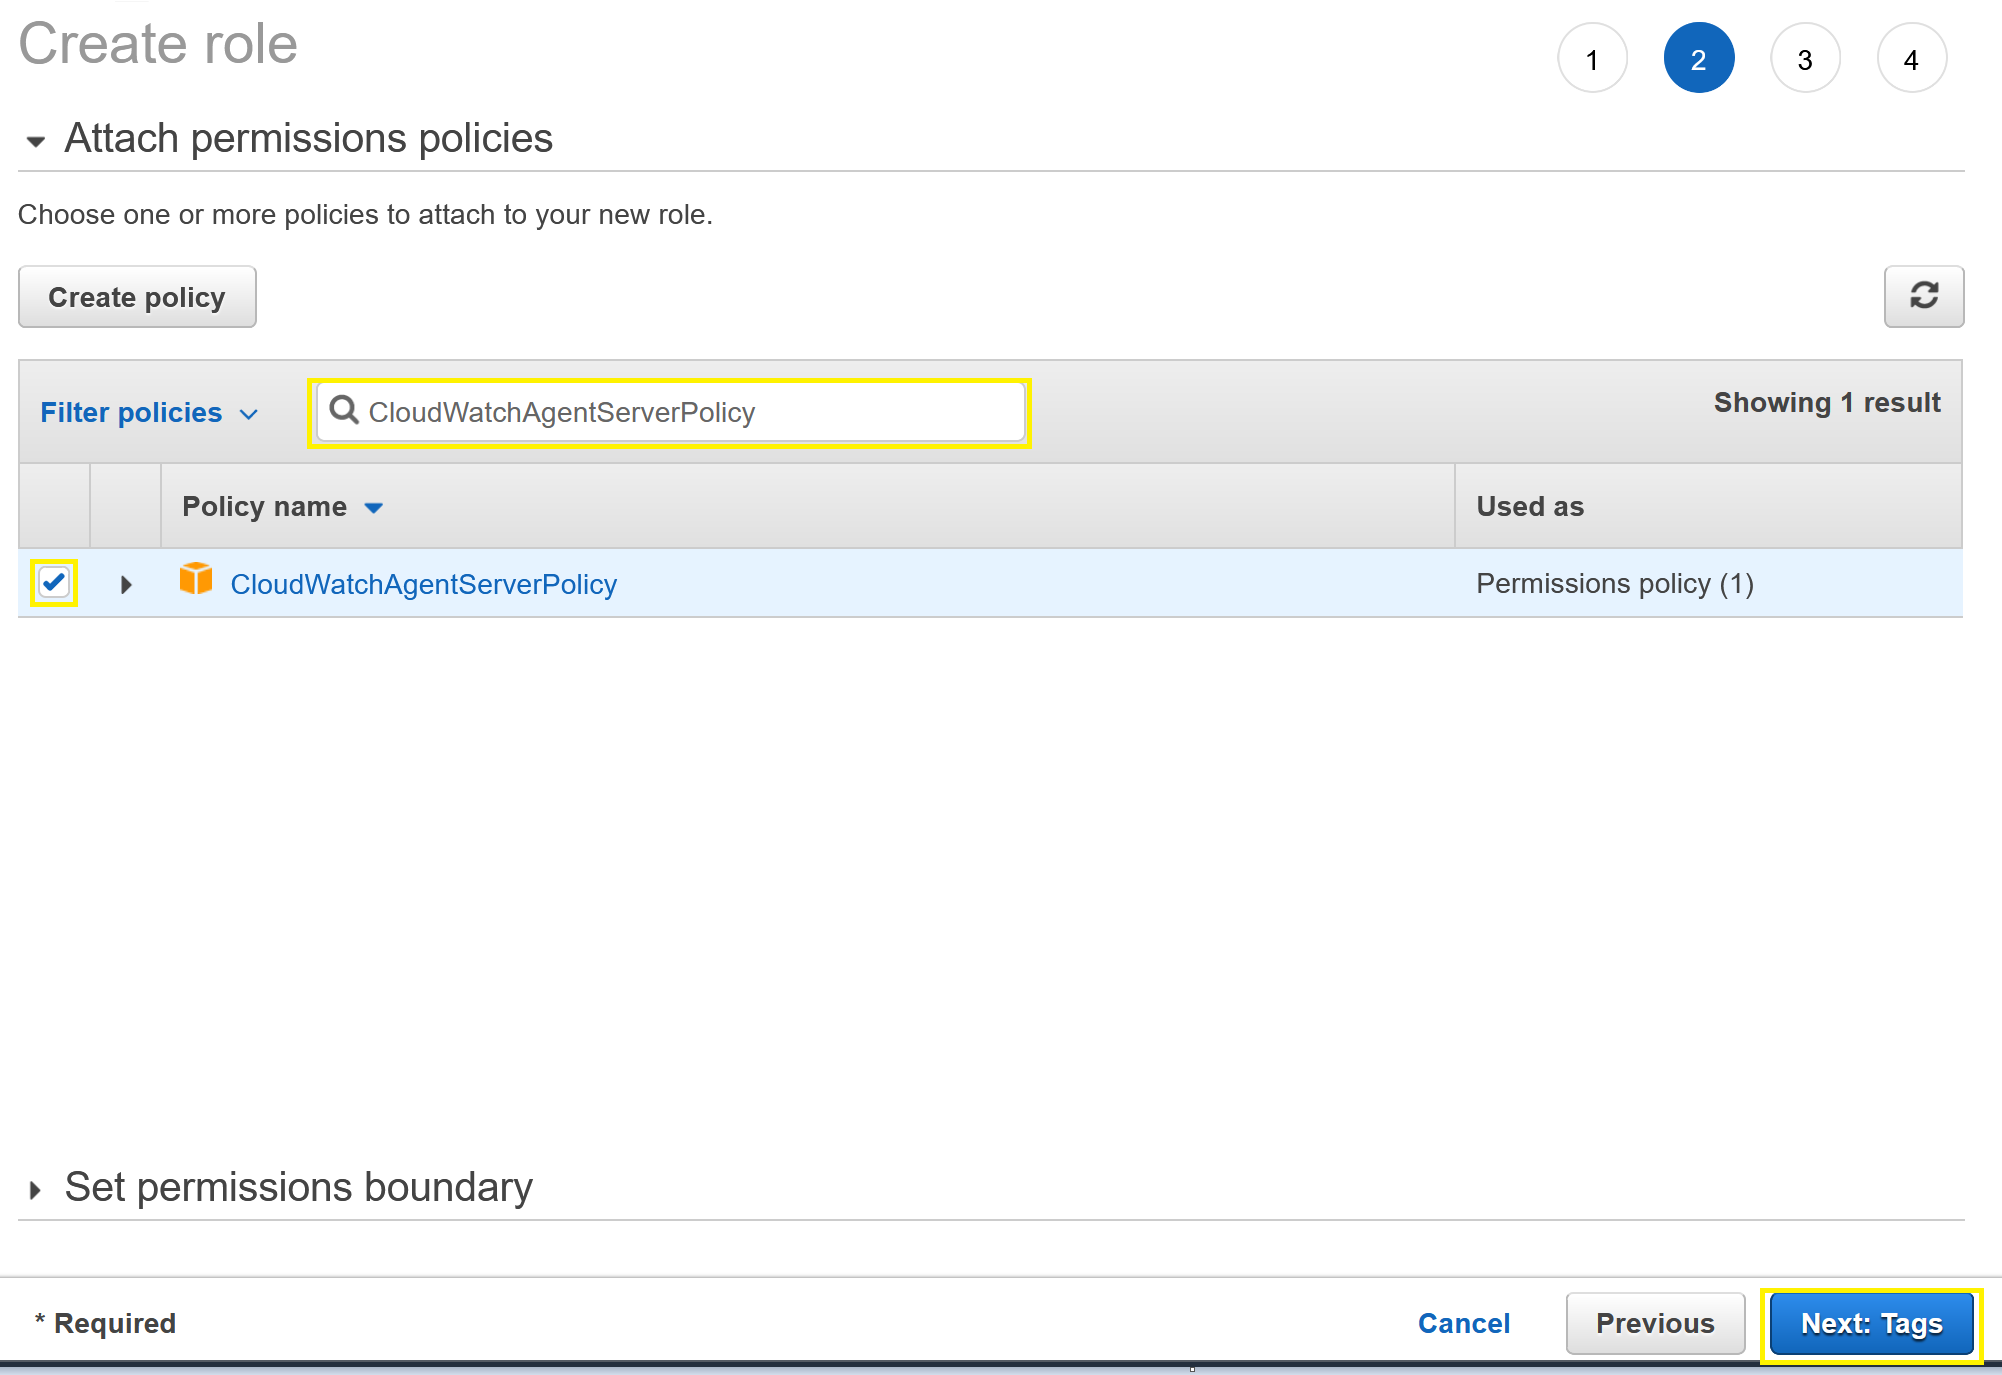 Attach permissions and policy menu showing CloudWatchAgentServerPolicy and Next: Tags selections.